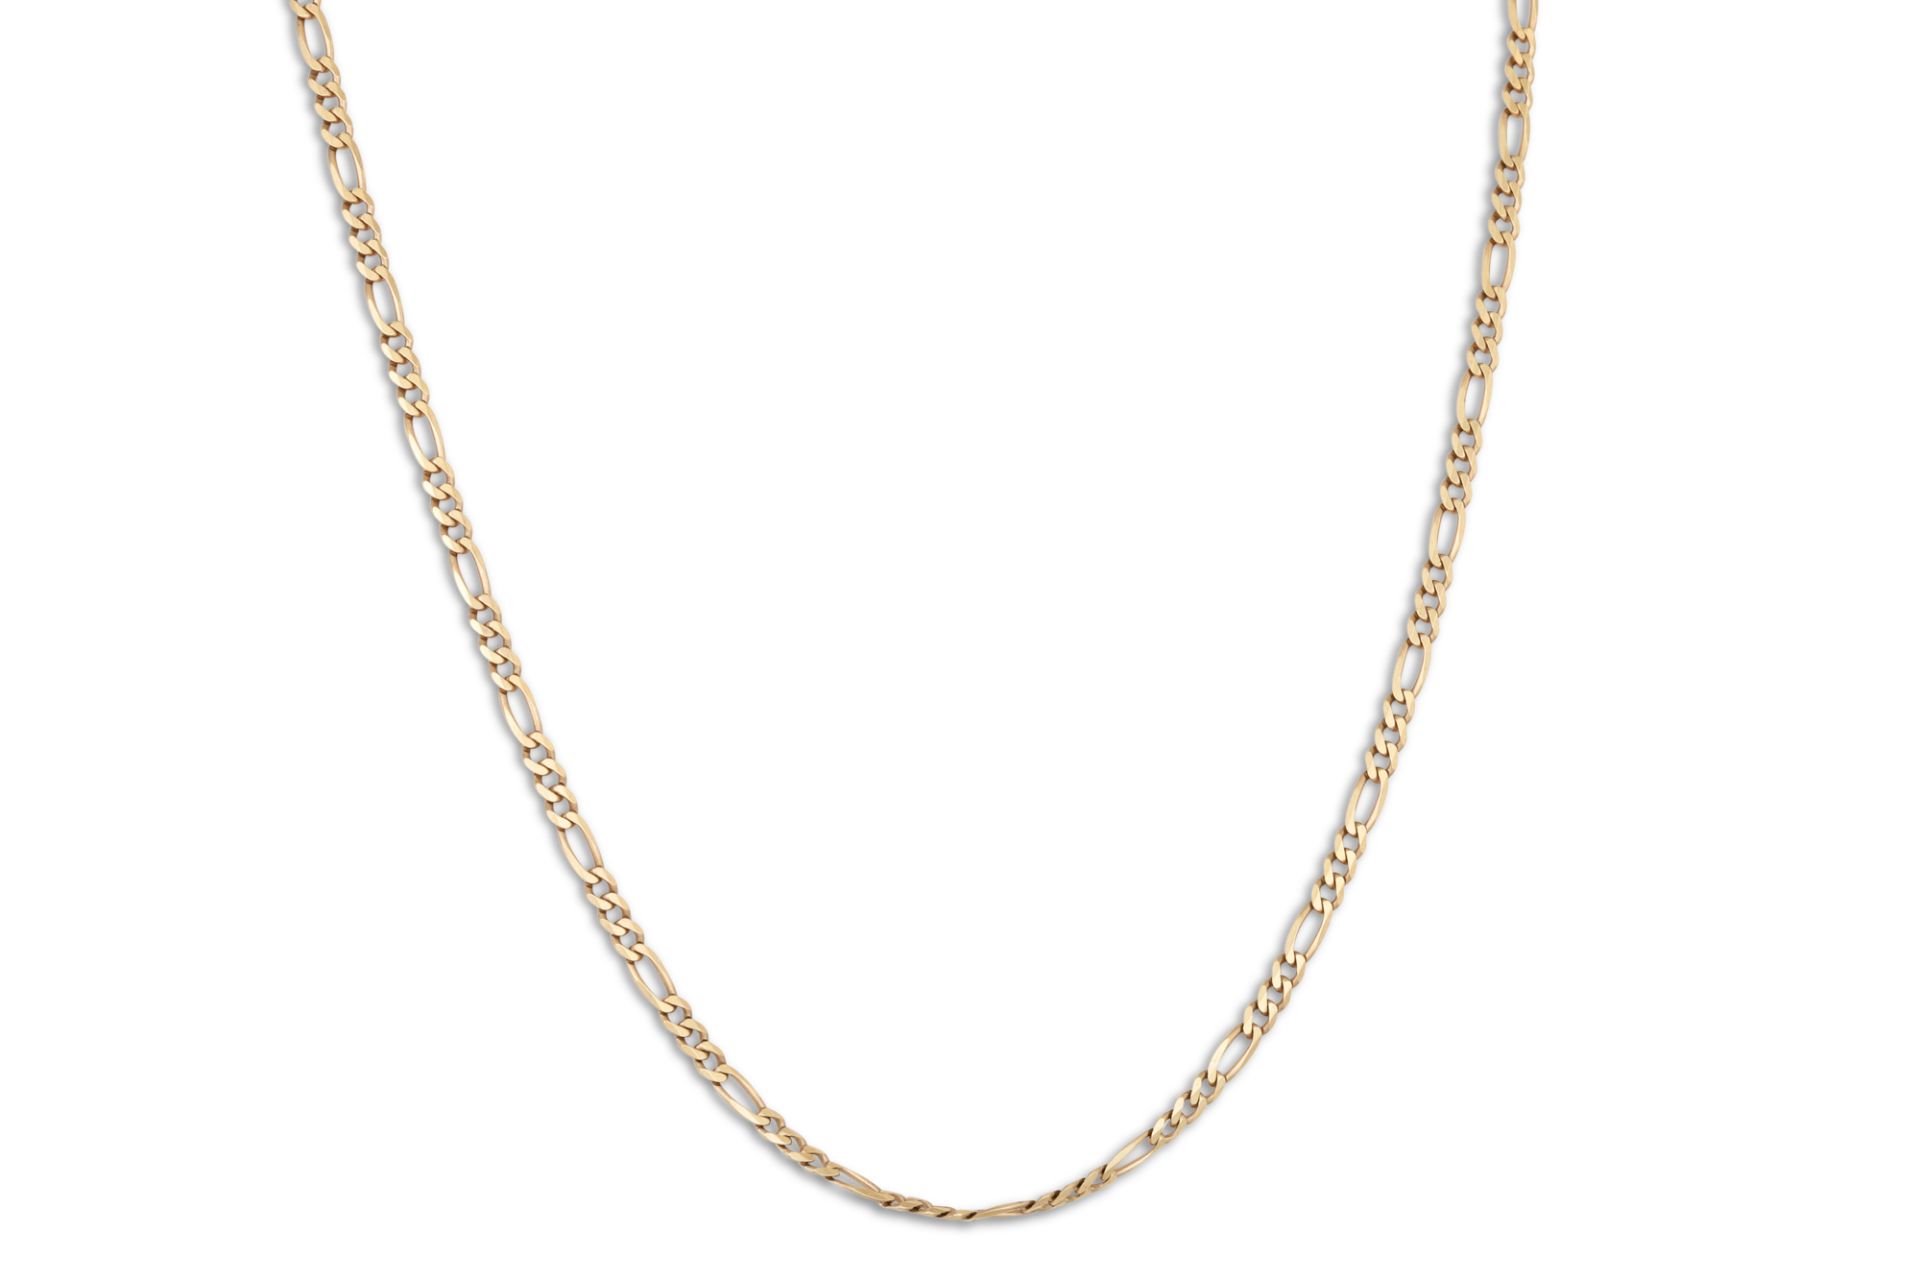 A 9CT GOLD FLAT FIGARO LINK NECK CHAIN, ca 21" (6.9 g.)